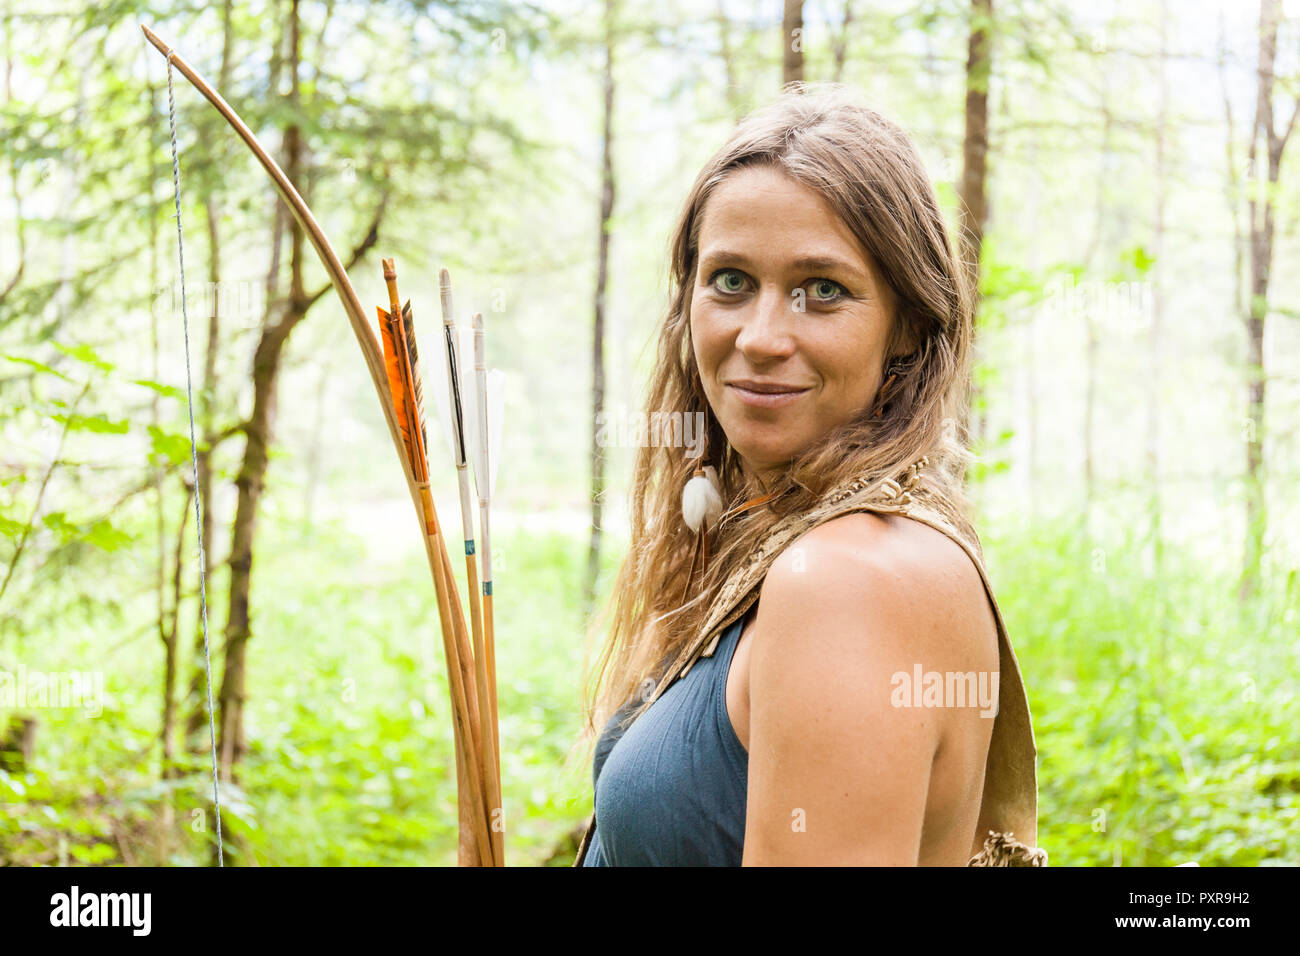 Portrait of smiling archeress in a forest Stock Photo